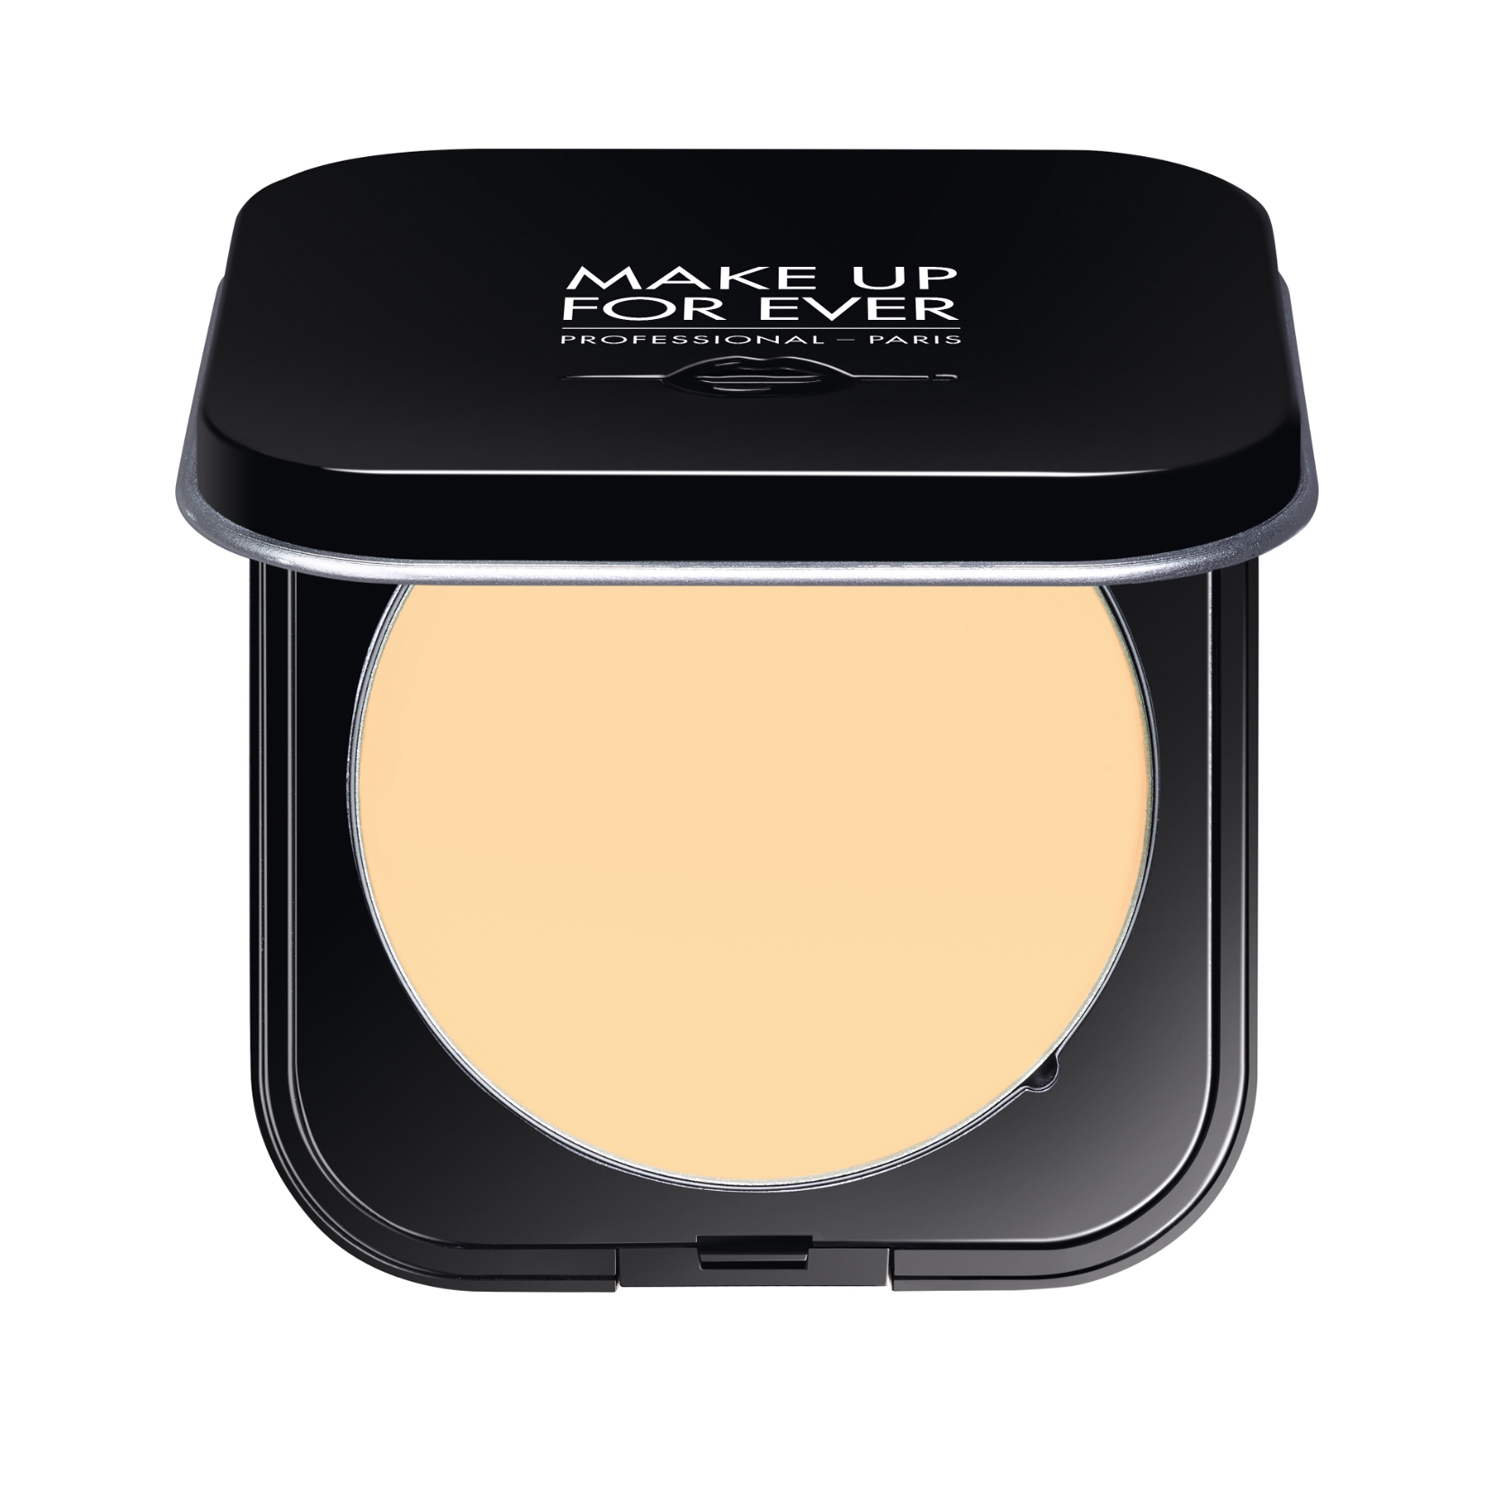 Make Up For Ever | Make Up For Ever Ultra HD Pressed Powder - 02 Banana (6.2g)